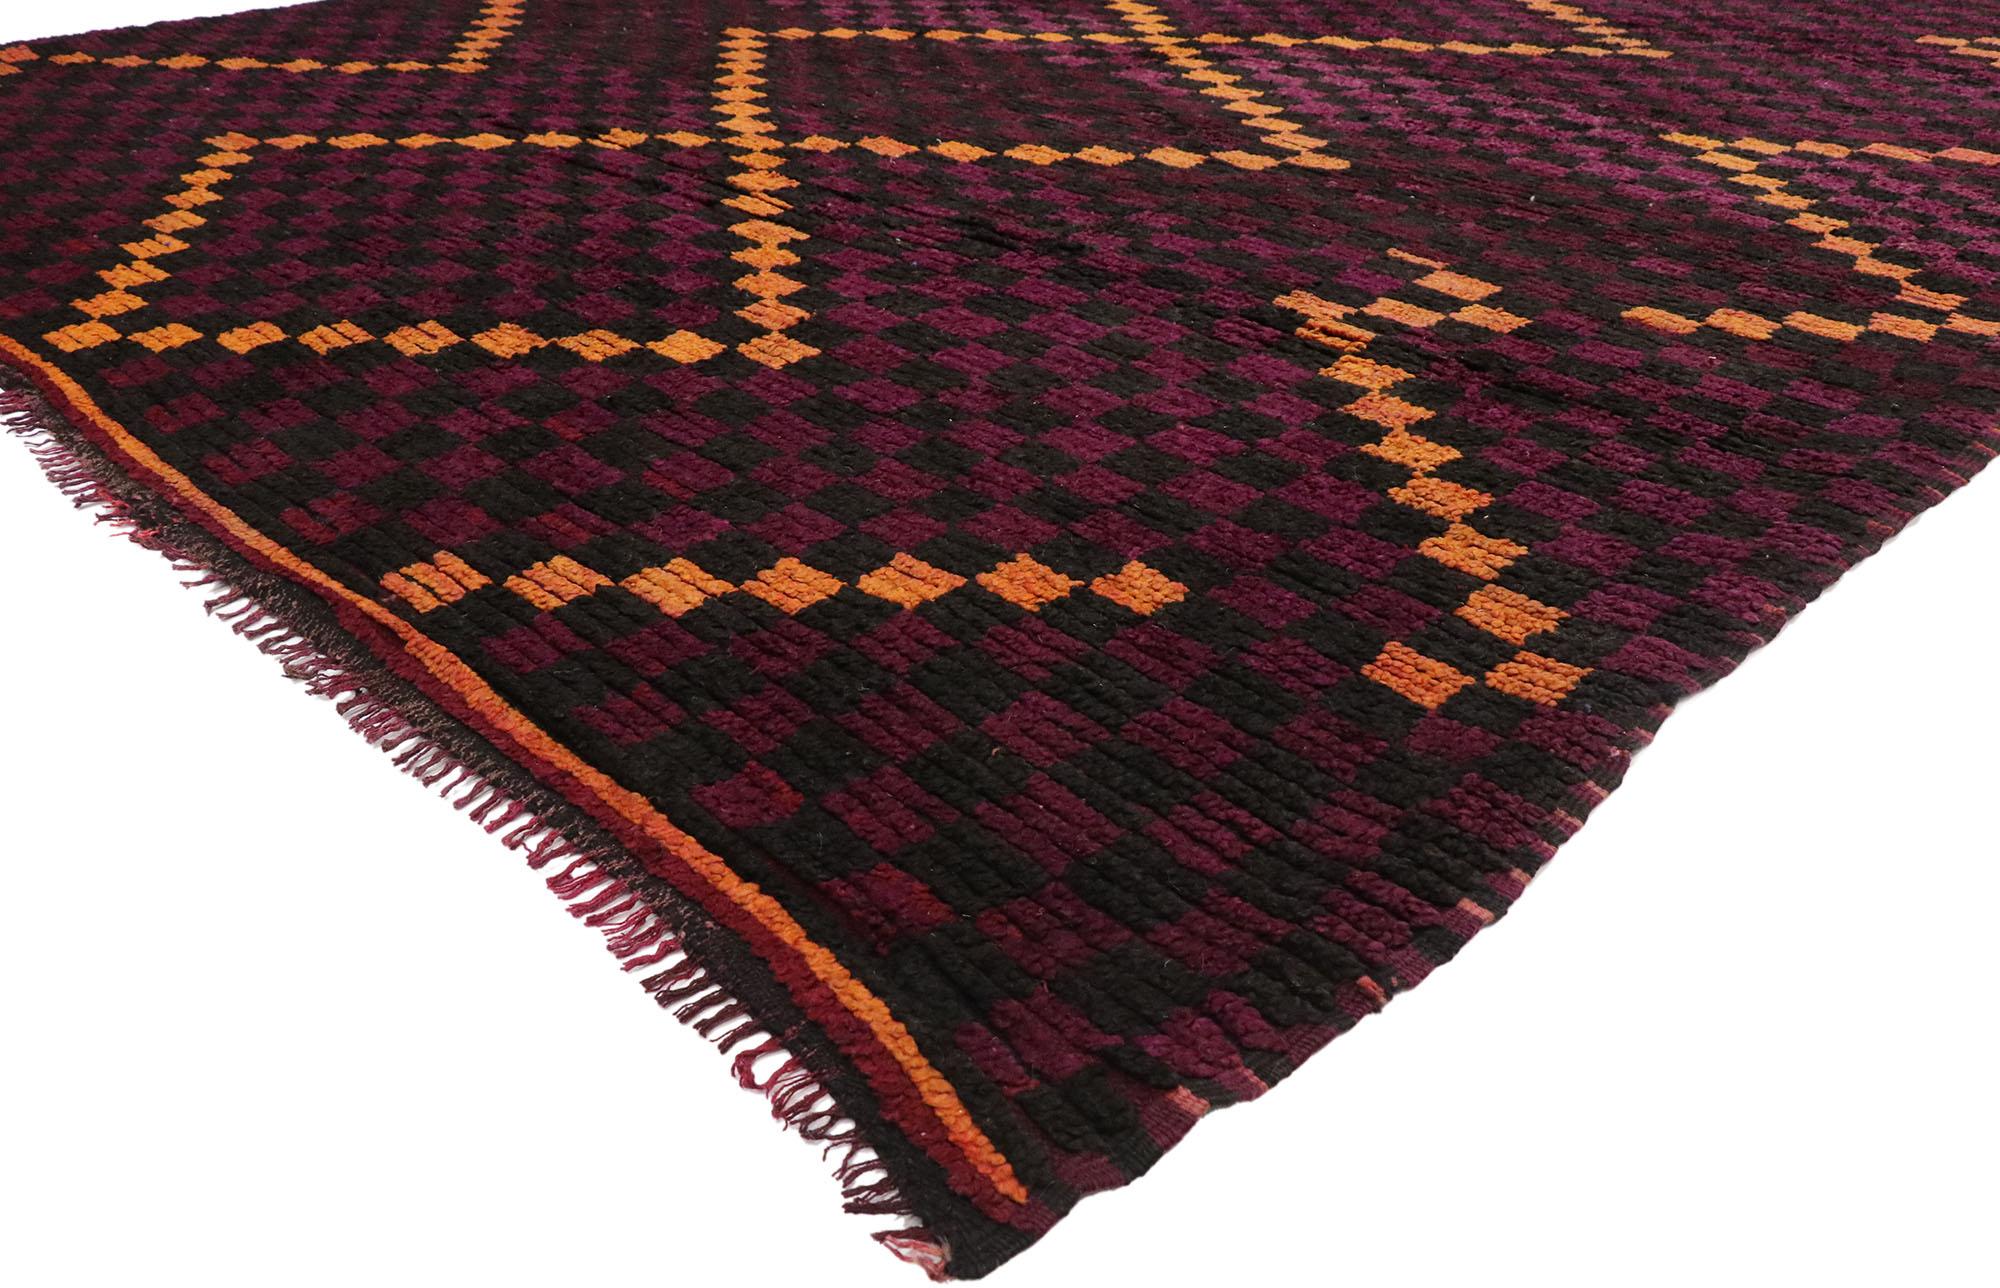 20202 Vintage Talsint Moroccan Rug, 06'02 x 15'04. Talsint rugs, originating from the Figuig area within the Aït Bou Ichaouen region of eastern Morocco, particularly nestled in the remote Atlas Mountains, are renowned for their traditional Berber